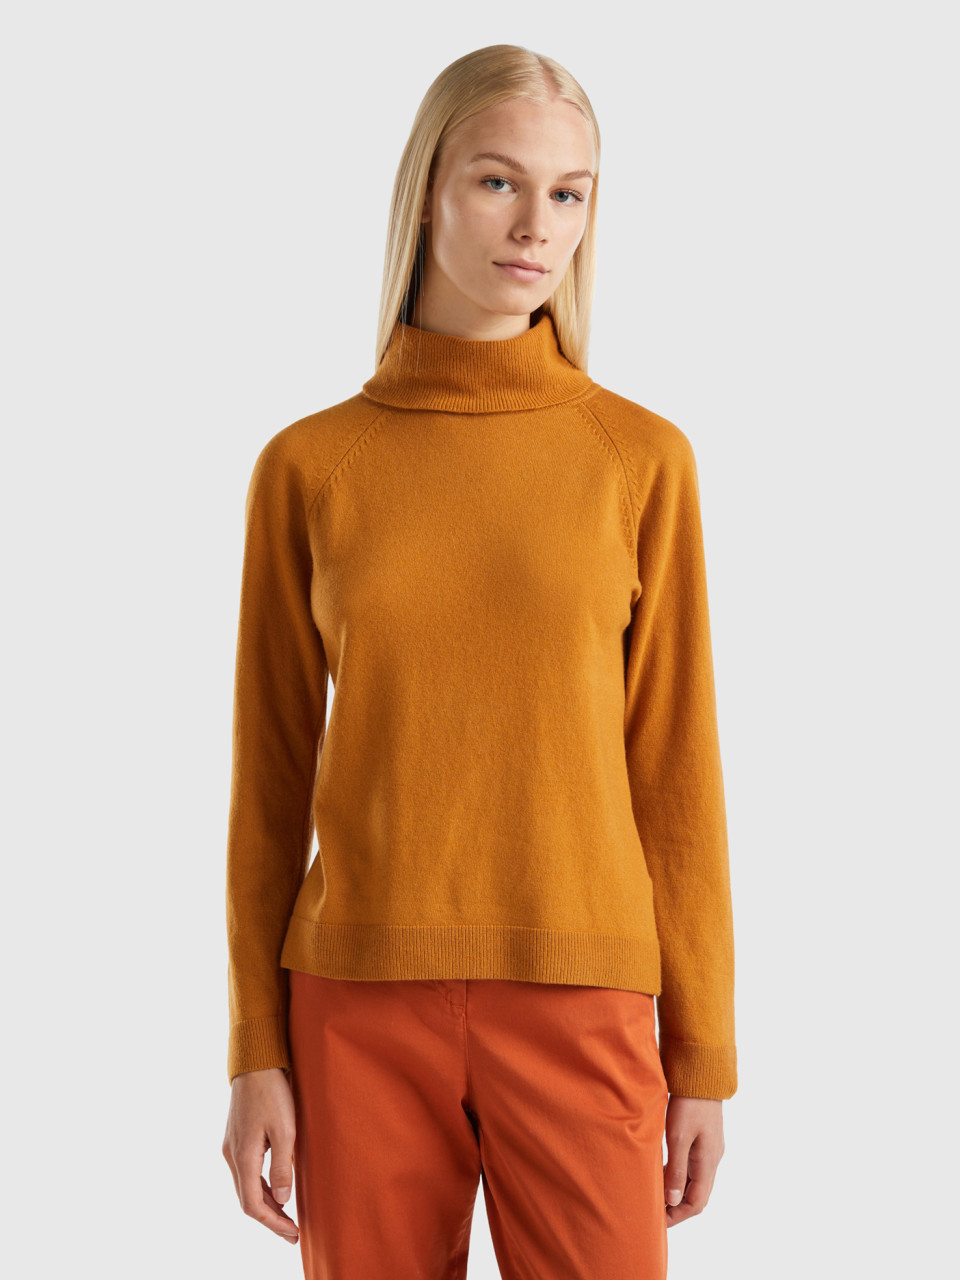 Benetton, Tobacco Turtleneck In Cashmere And Wool Blend, , Women